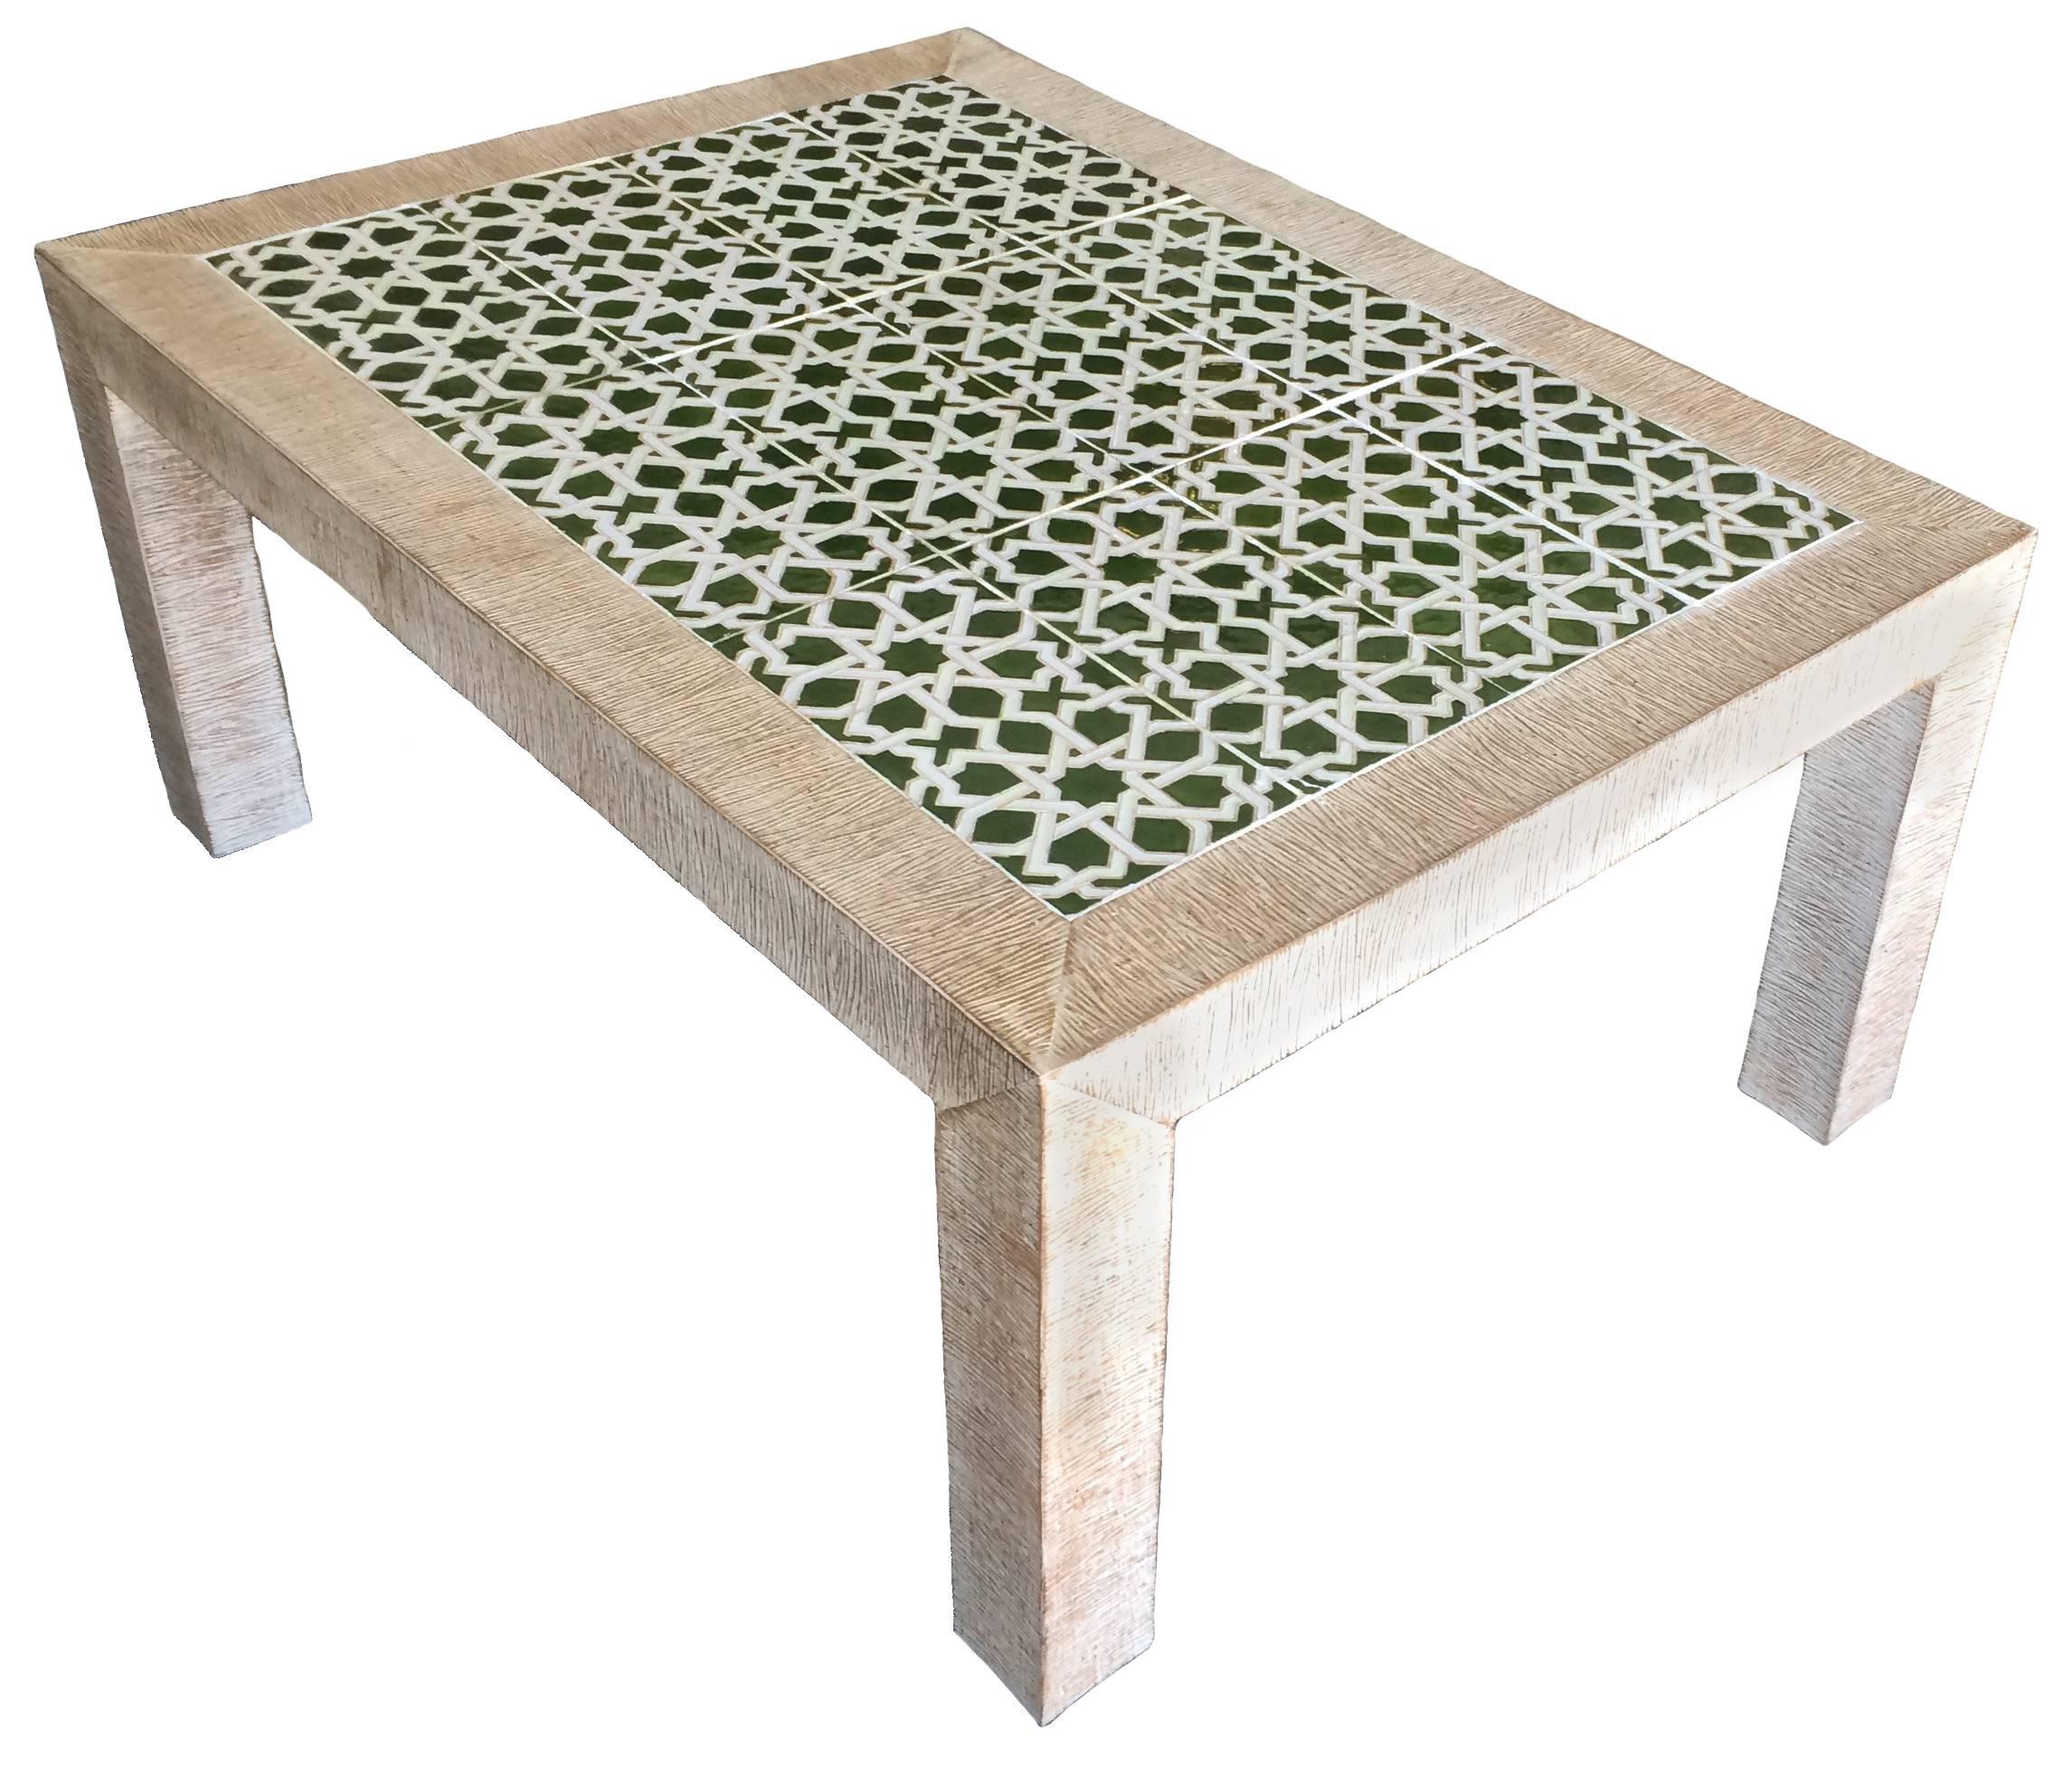 Mid-Century Modern combed wood and tile cocktail table. Solid oak with combed detailing and whitewash finish. Medium green and white geometric tile inset top. No makers mark.